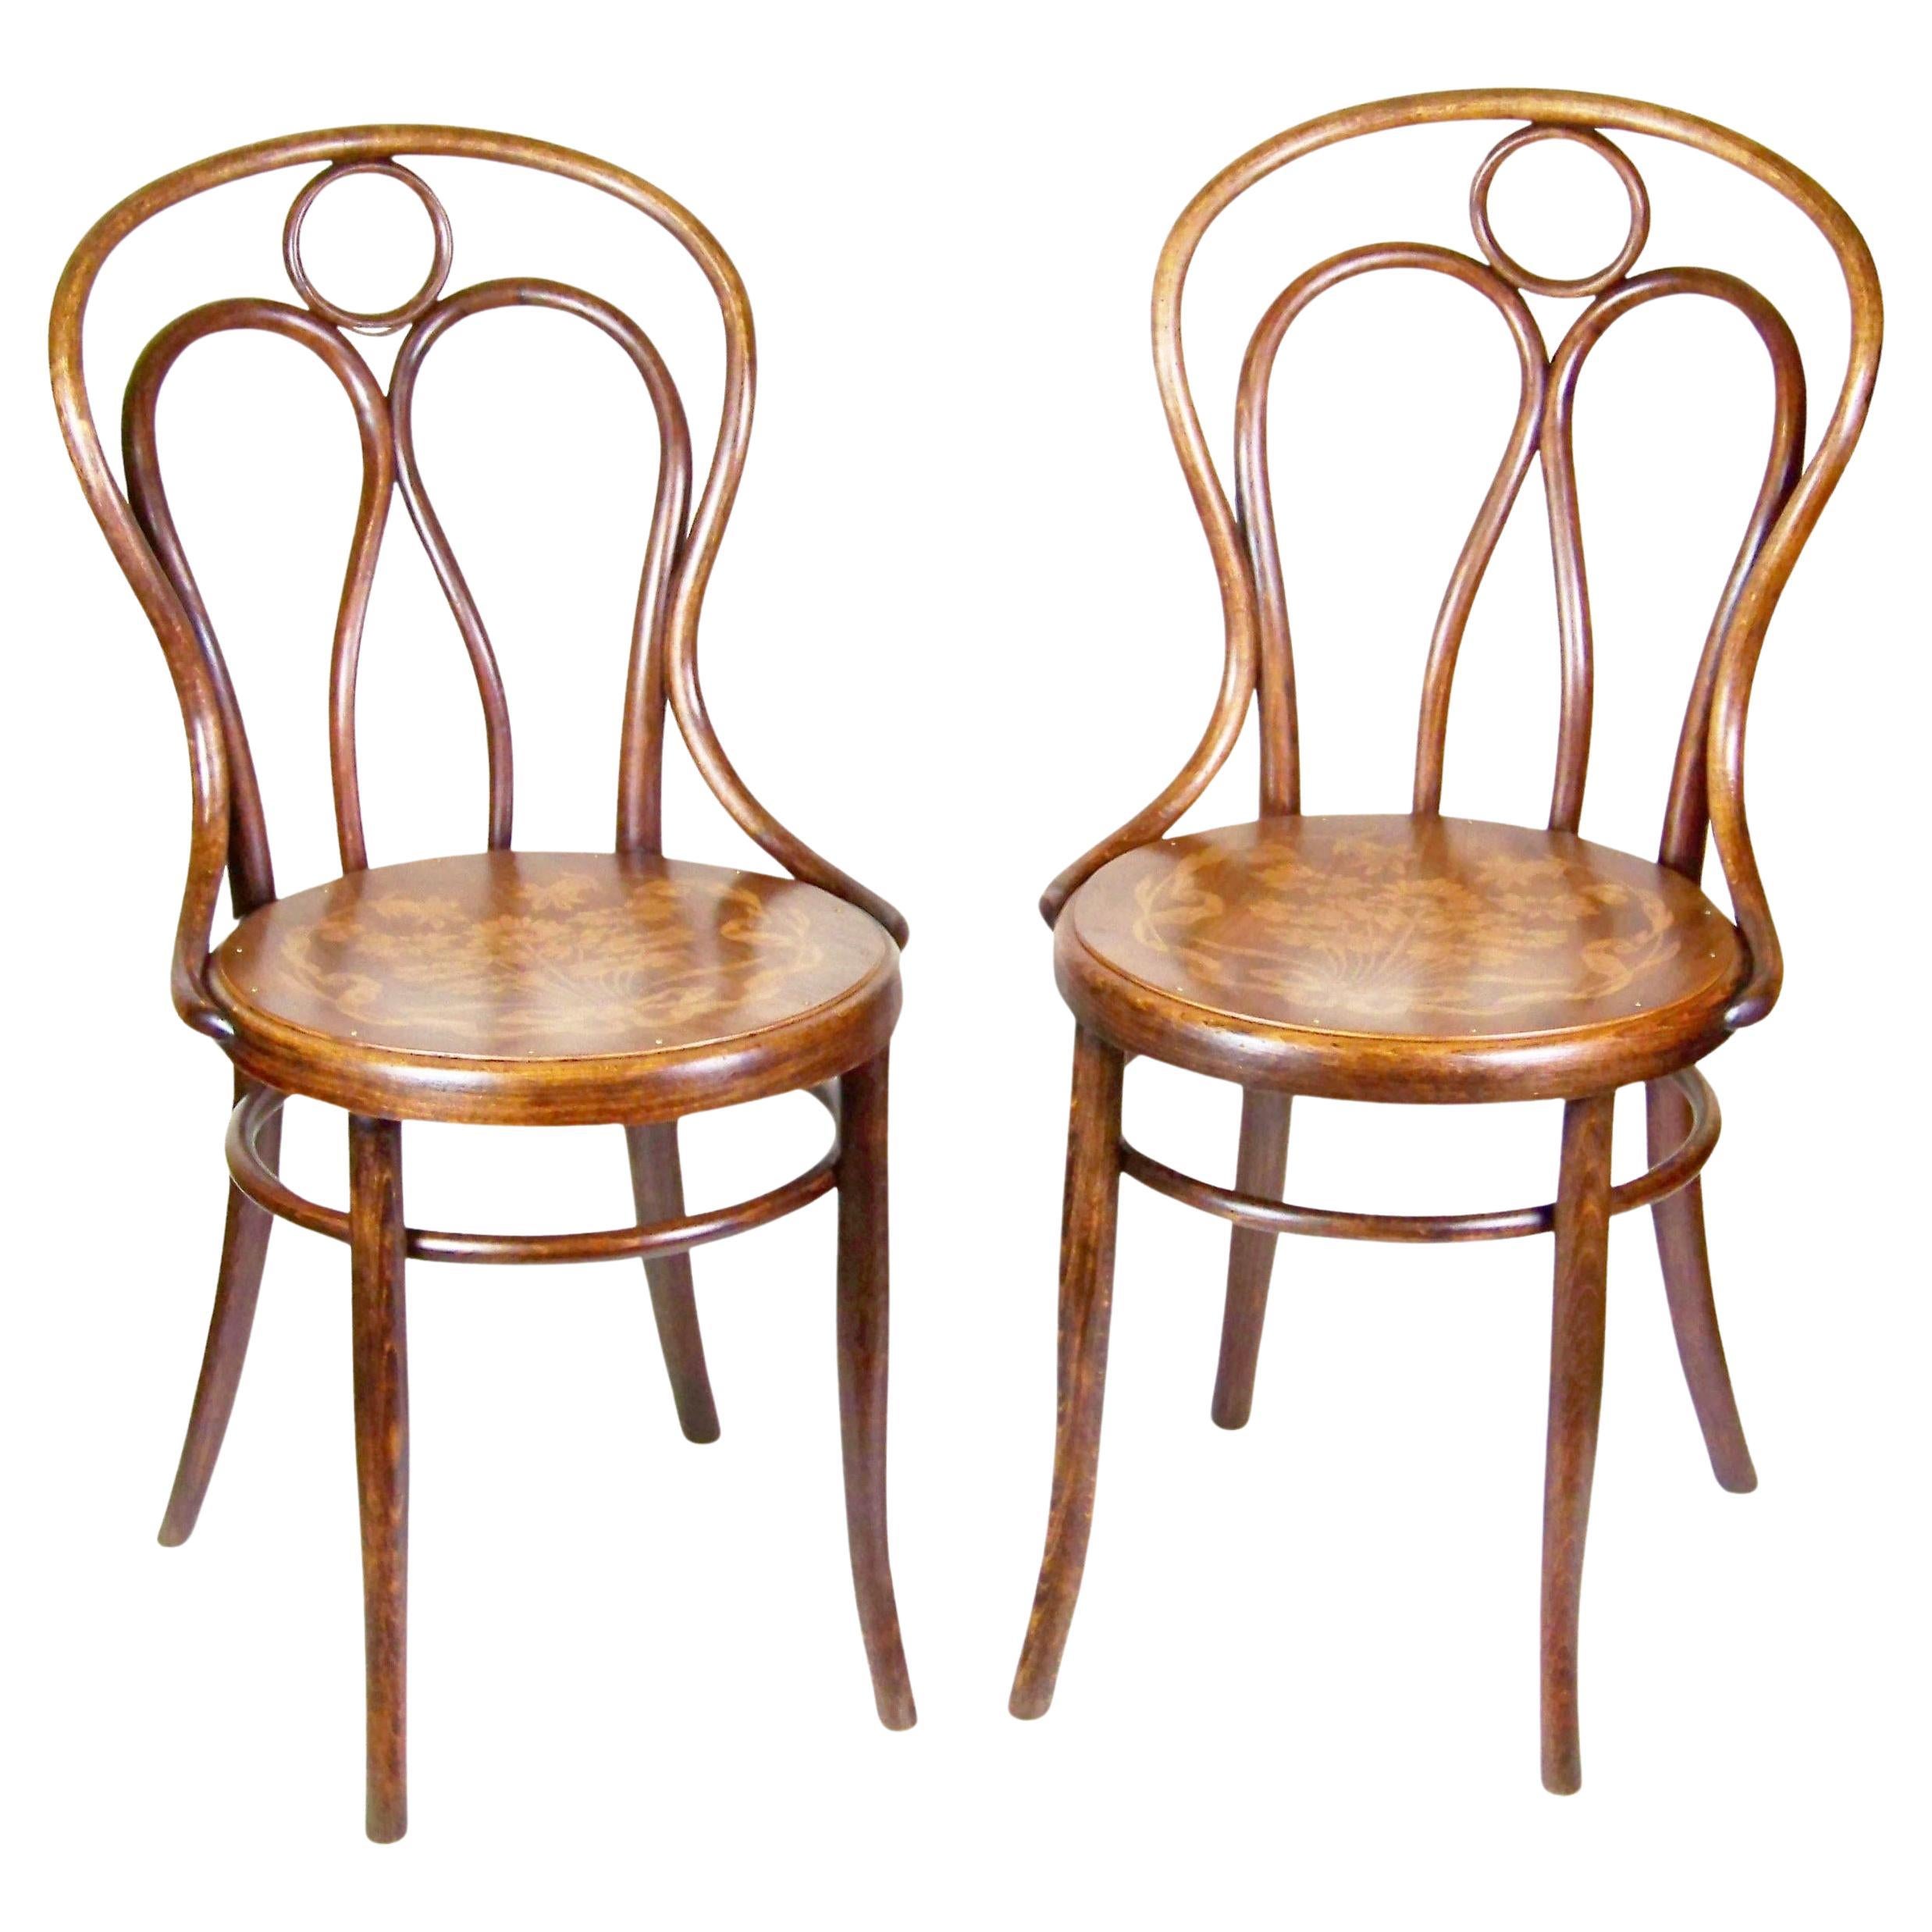 Two Chairs Thonet Nr.19, circa 1900 For Sale